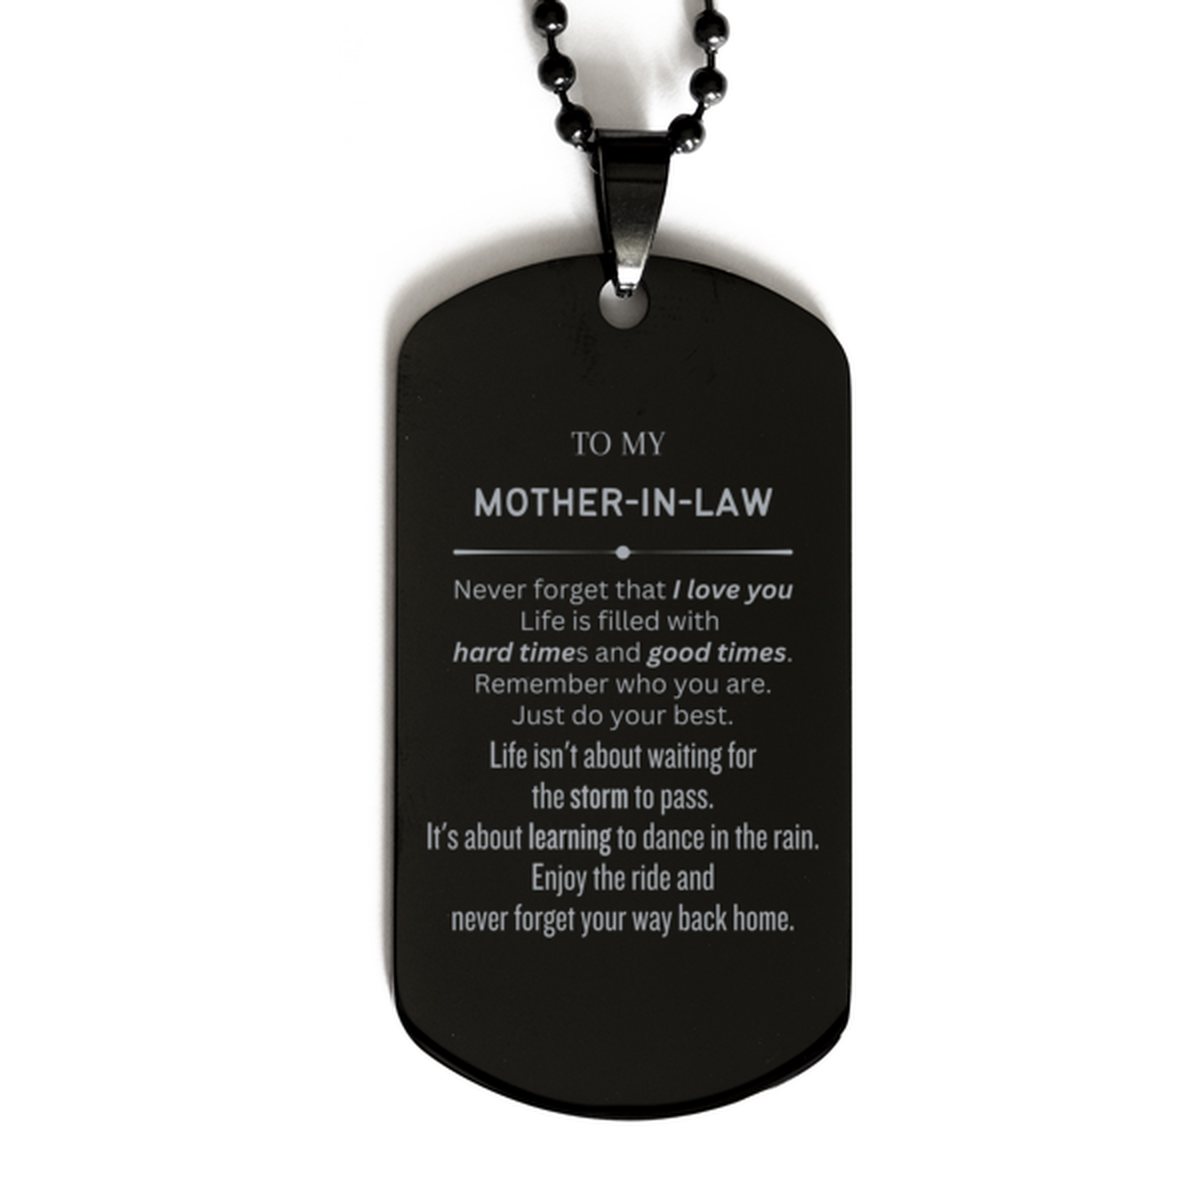 Christmas Mother-In-Law Black Dog Tag Gifts, To My Mother-In-Law Birthday Thank You Gifts For Mother-In-Law, Graduation Unique Gifts For Mother-In-Law To My Mother-In-Law Never forget that I love you life is filled with hard times and good times. Remember